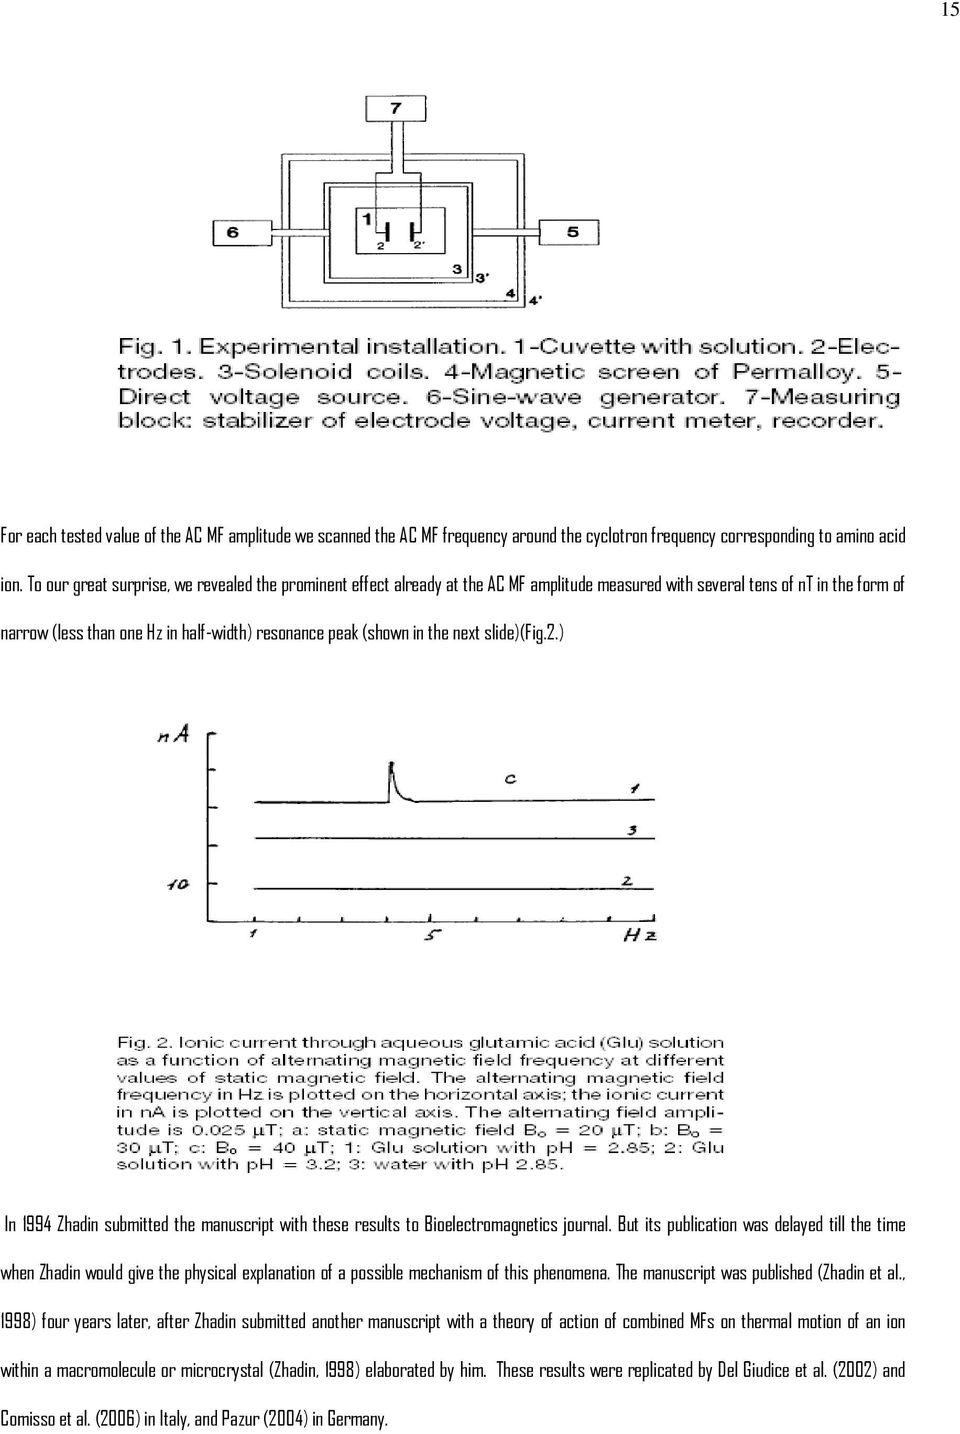 the next slide)(fig.2.) In 1994 Zhadin submitted the manuscript with these results to Bioelectromagnetics journal.